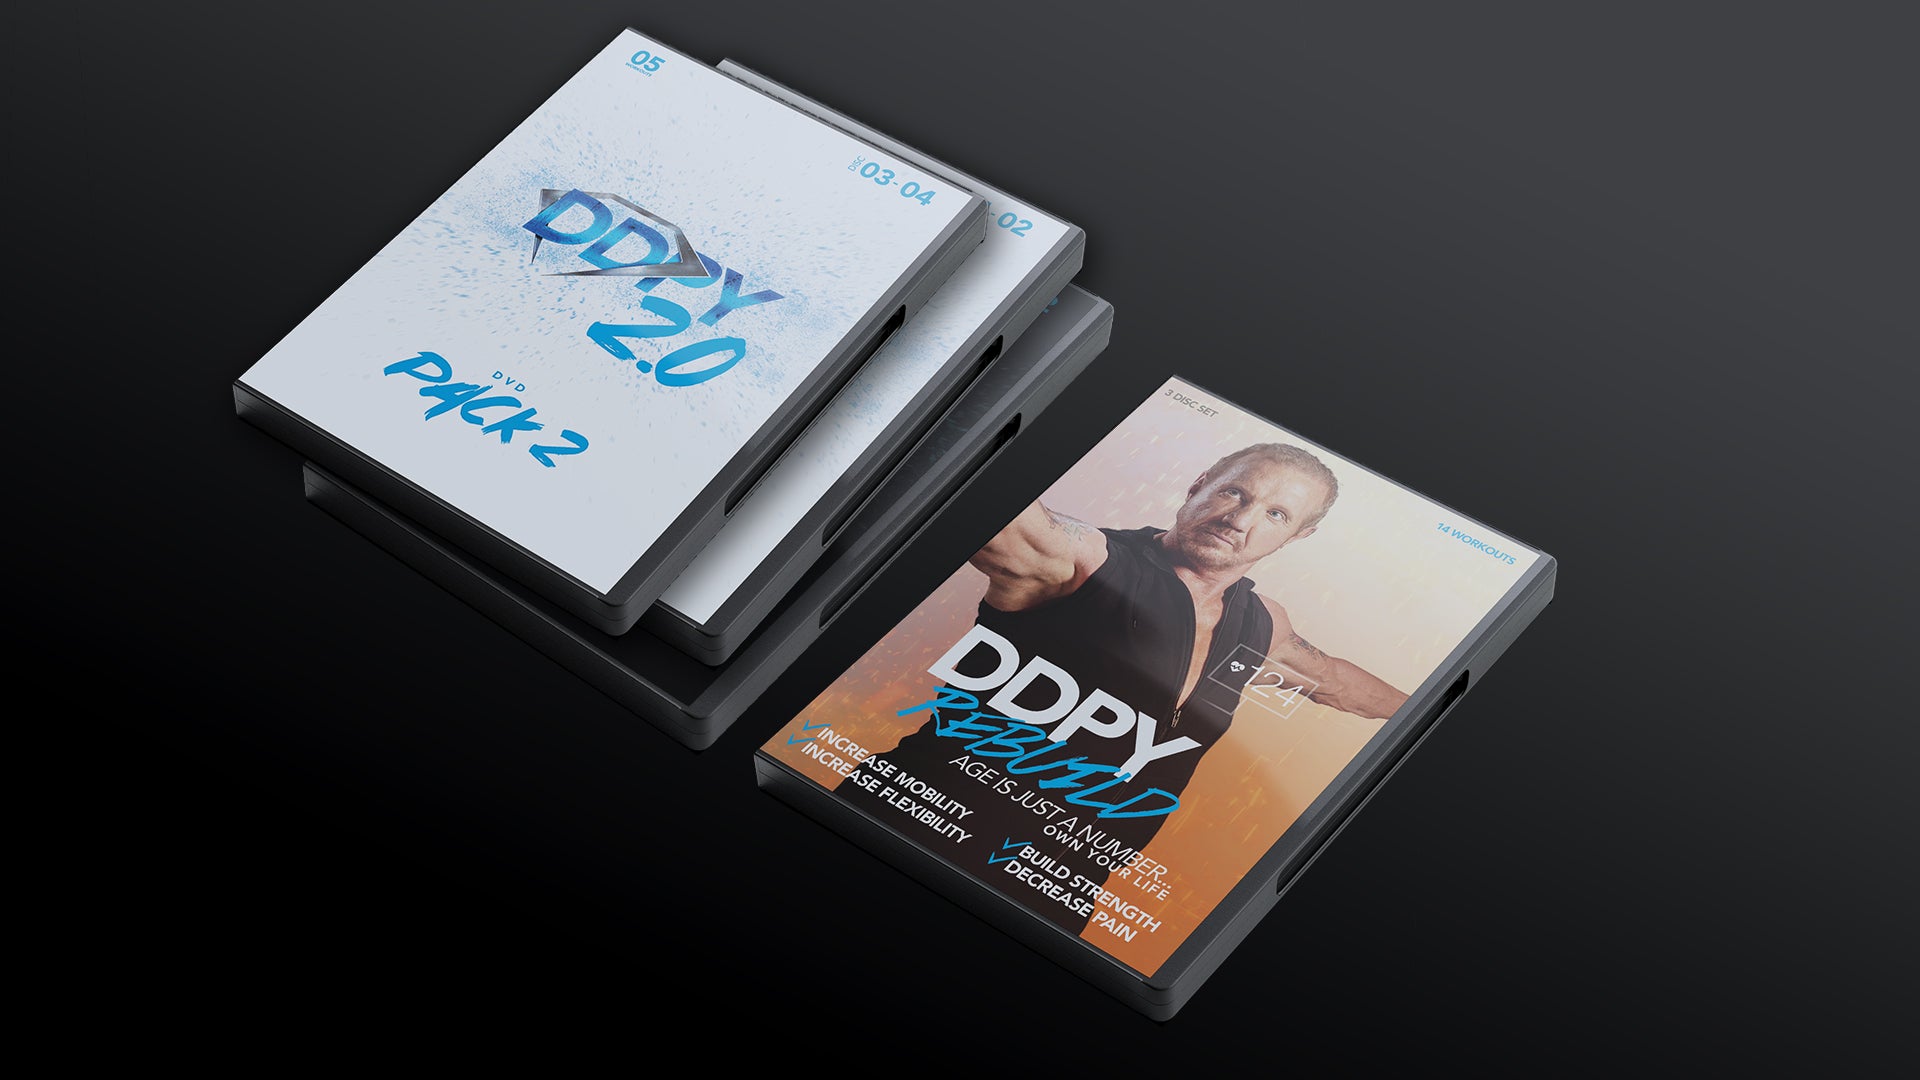 Which-DVD-is-right-for-me21 – DDP Yoga